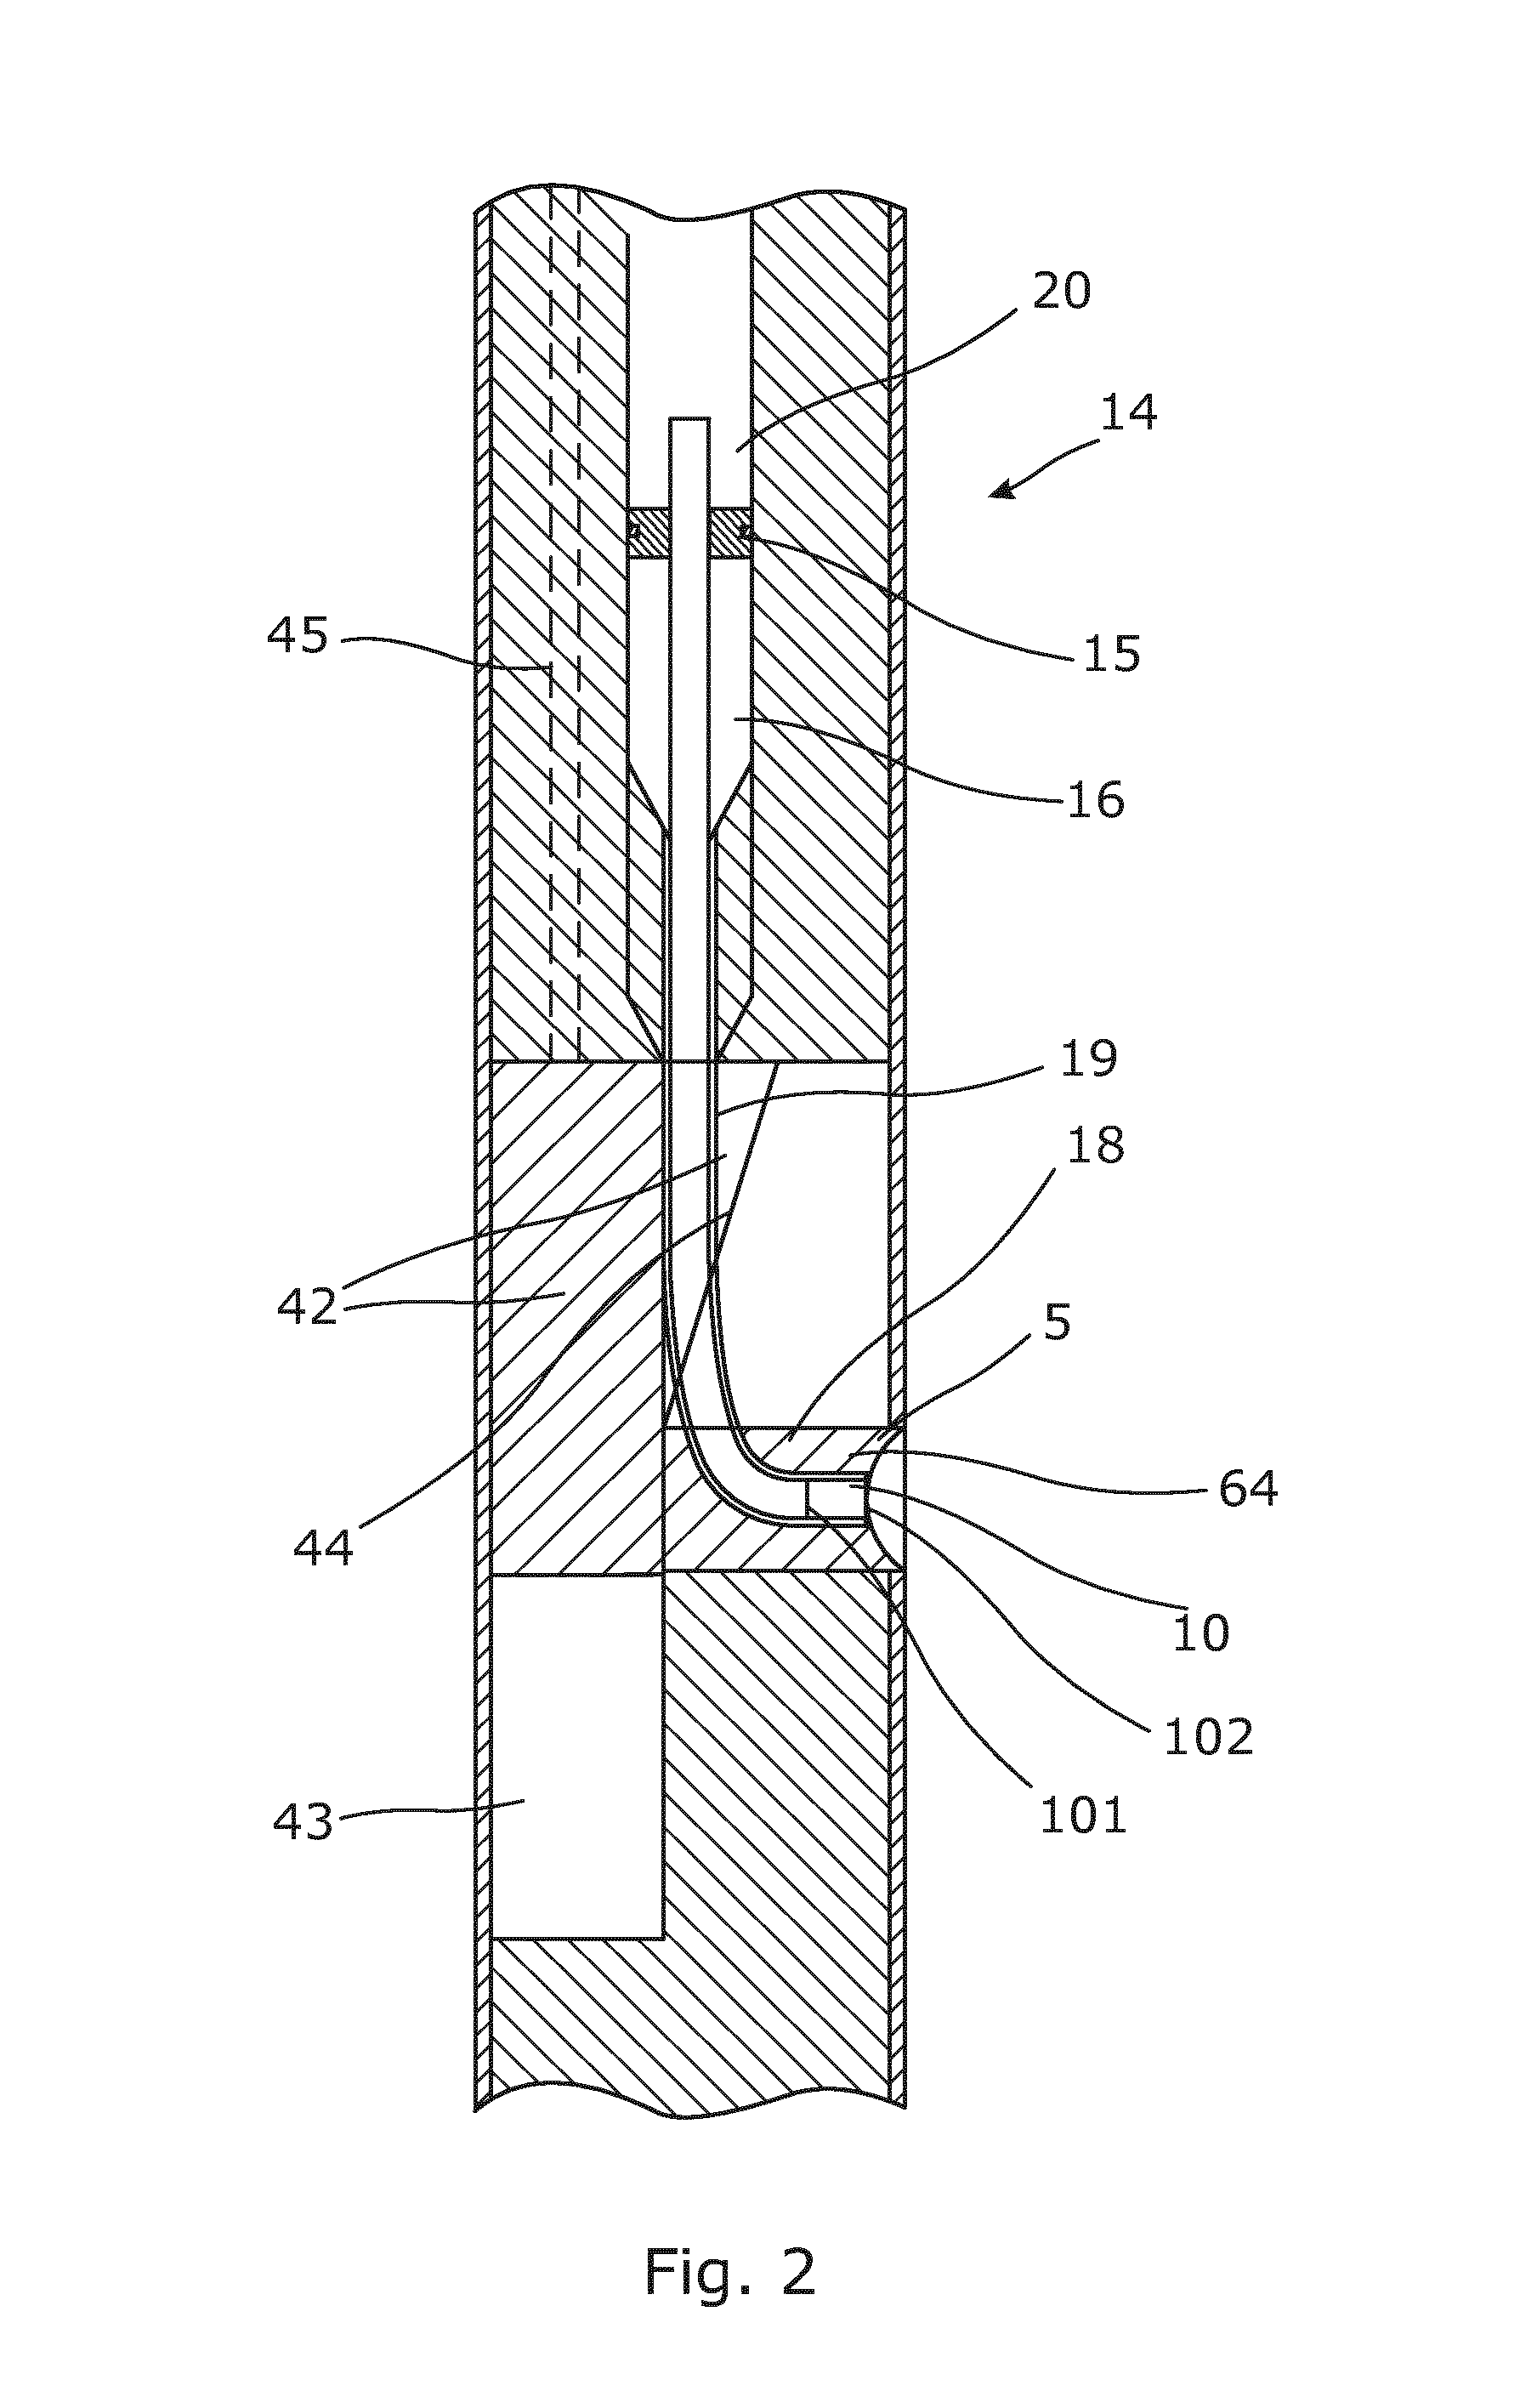 Formation penetrating tool